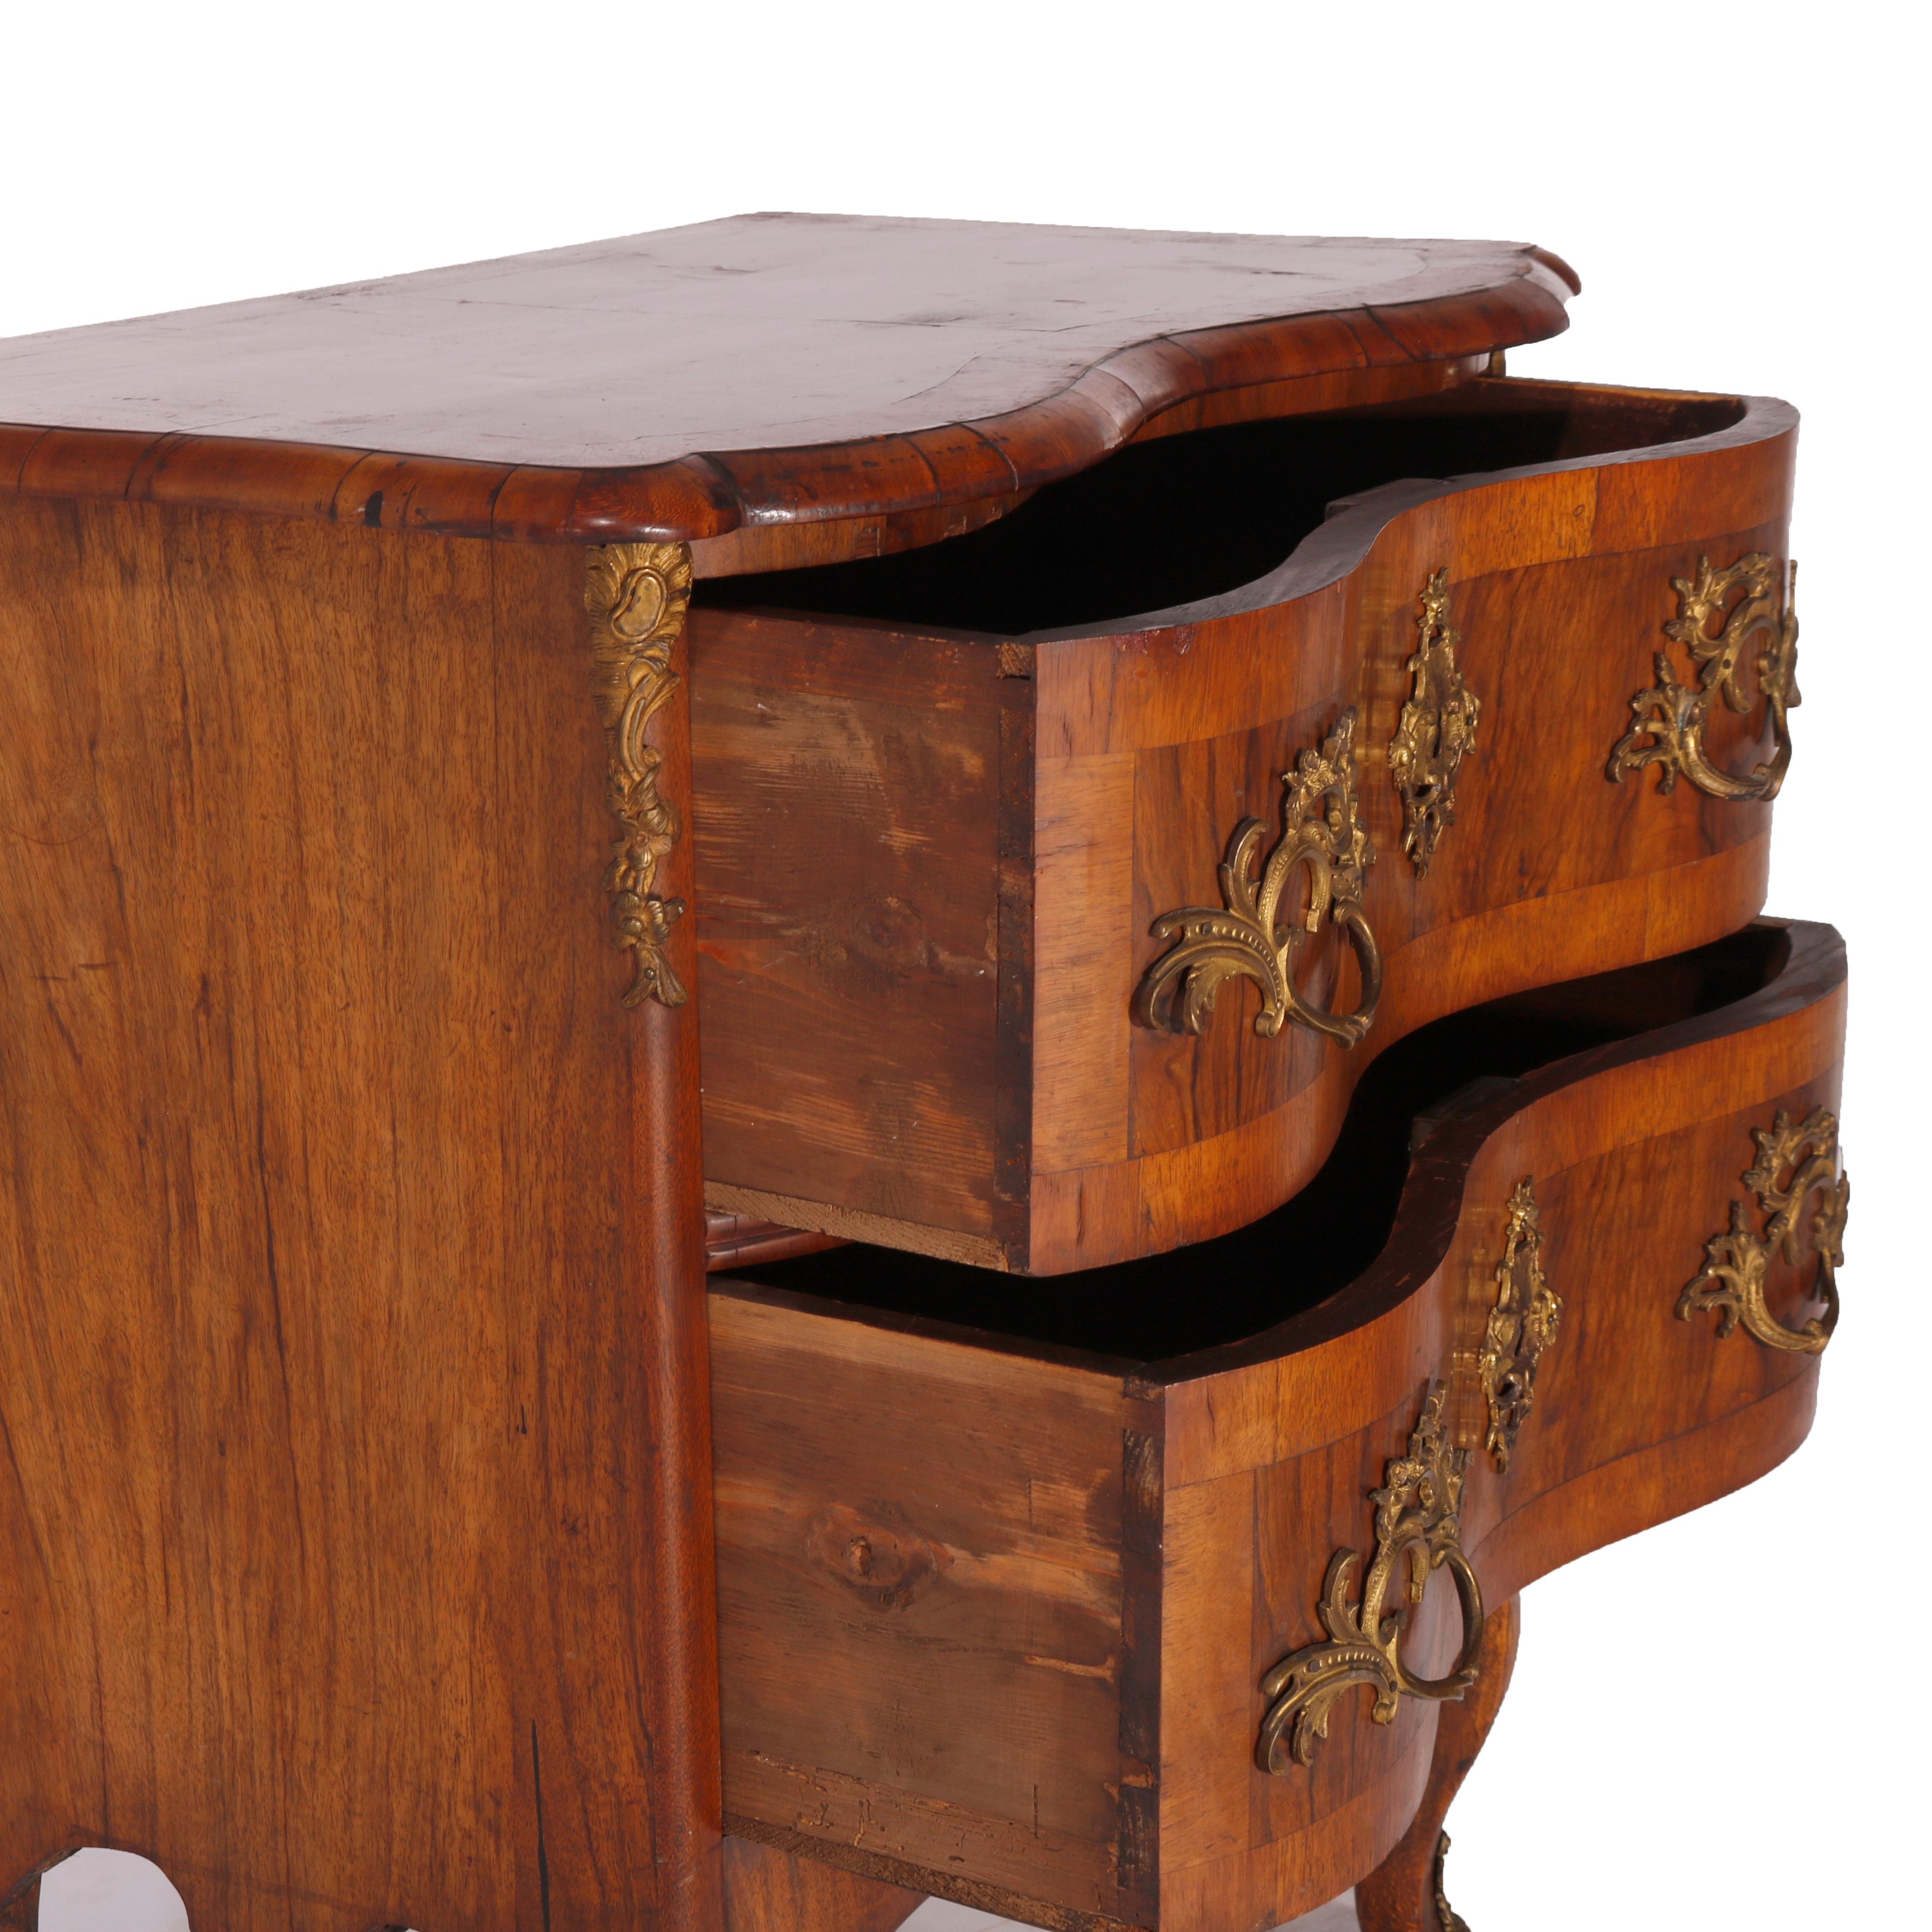  Antique Italian Kingwood, Satinwood & Burl Chest with Ormolu Mounts Late 18th C For Sale 6